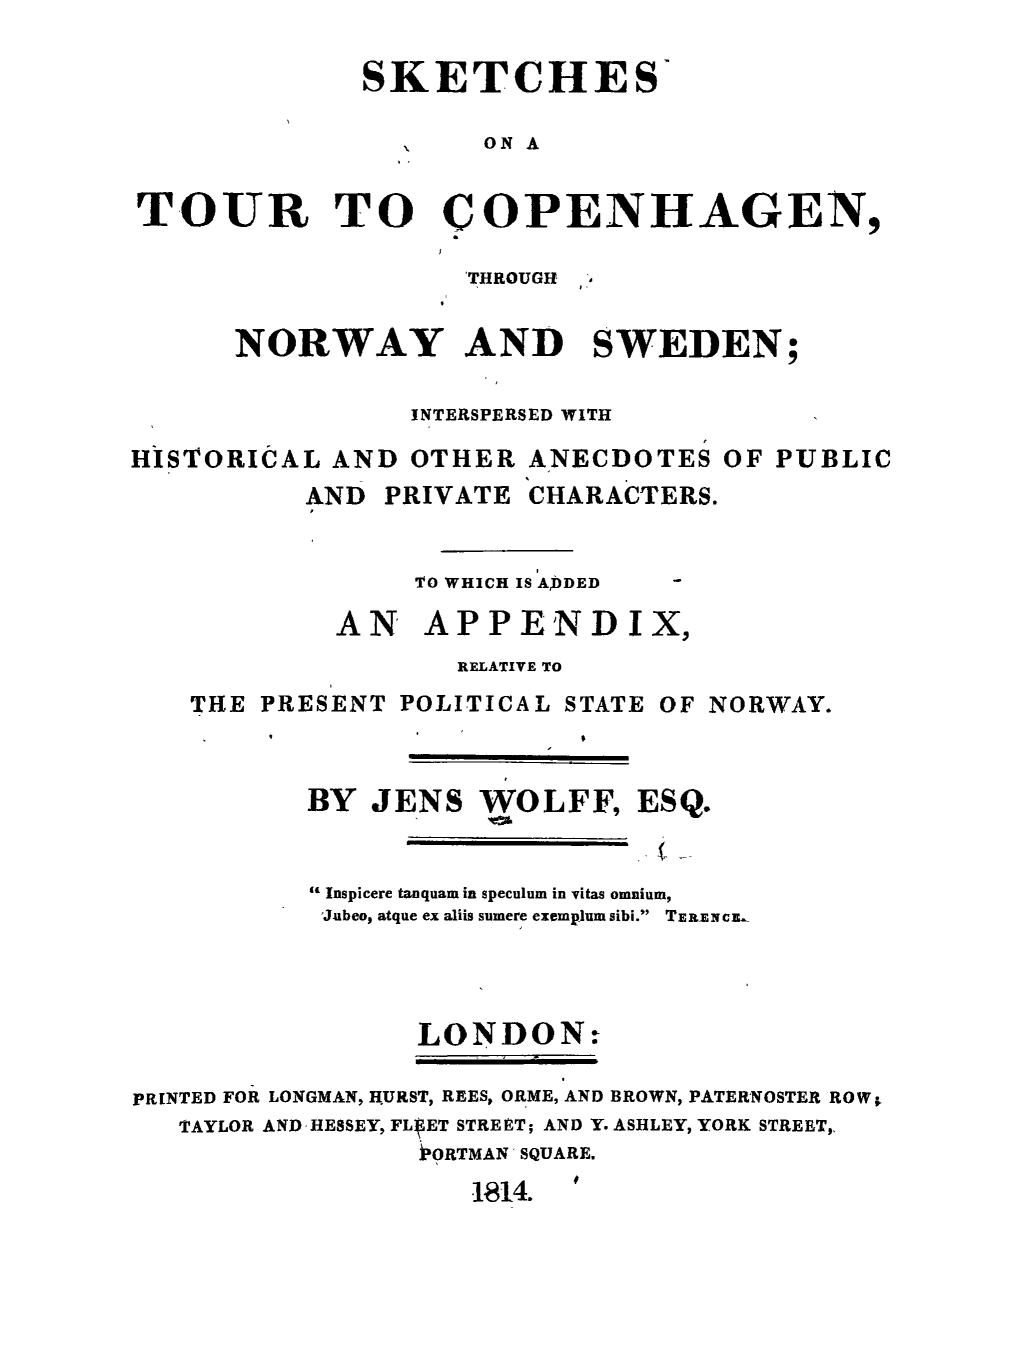 Sketches on a Tour to Copenhagen, Through Norway and Sweden